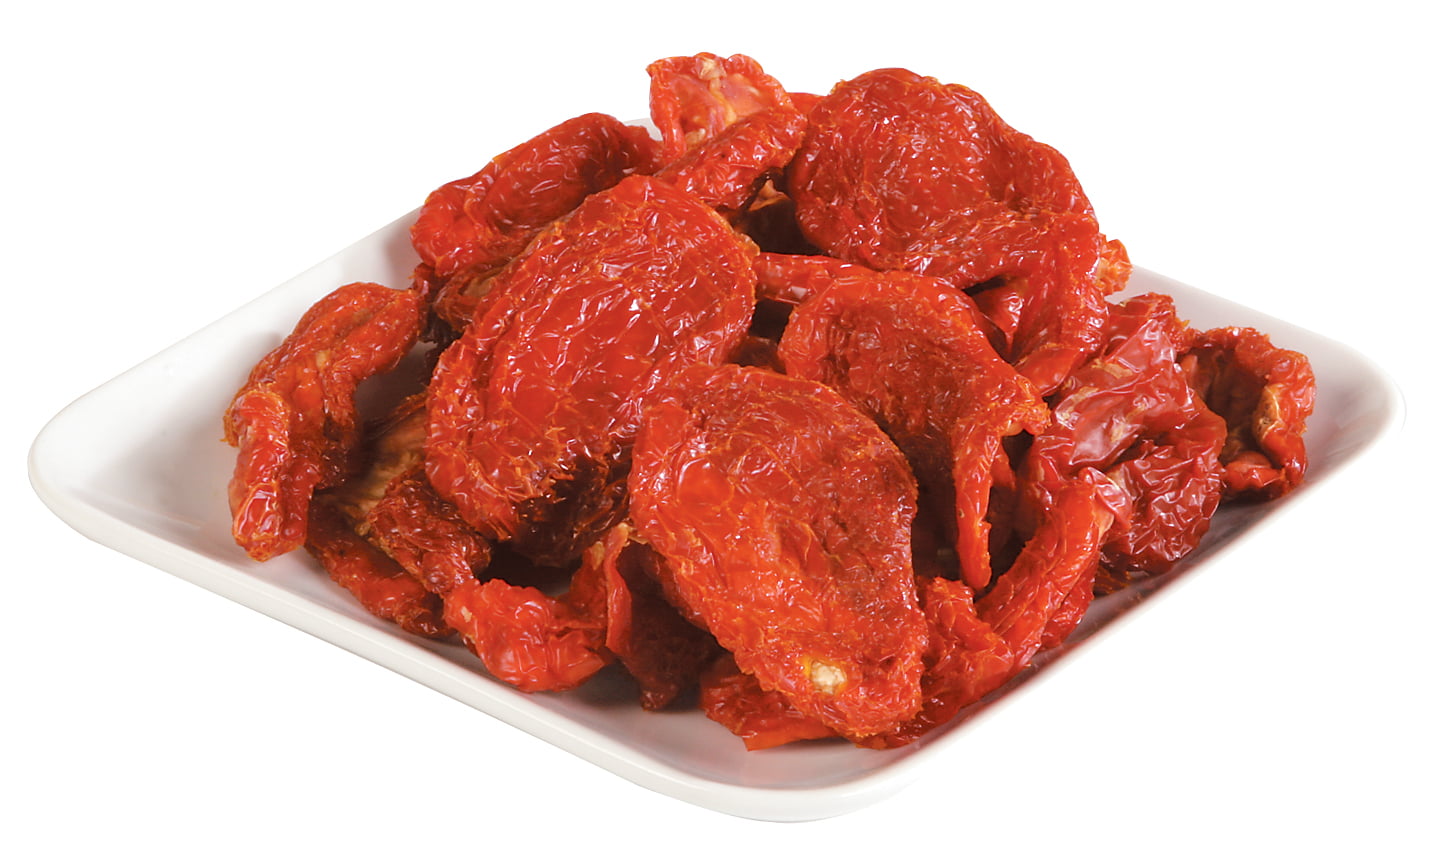 Plate of Sundried Tomatoes Isolated Food Picture